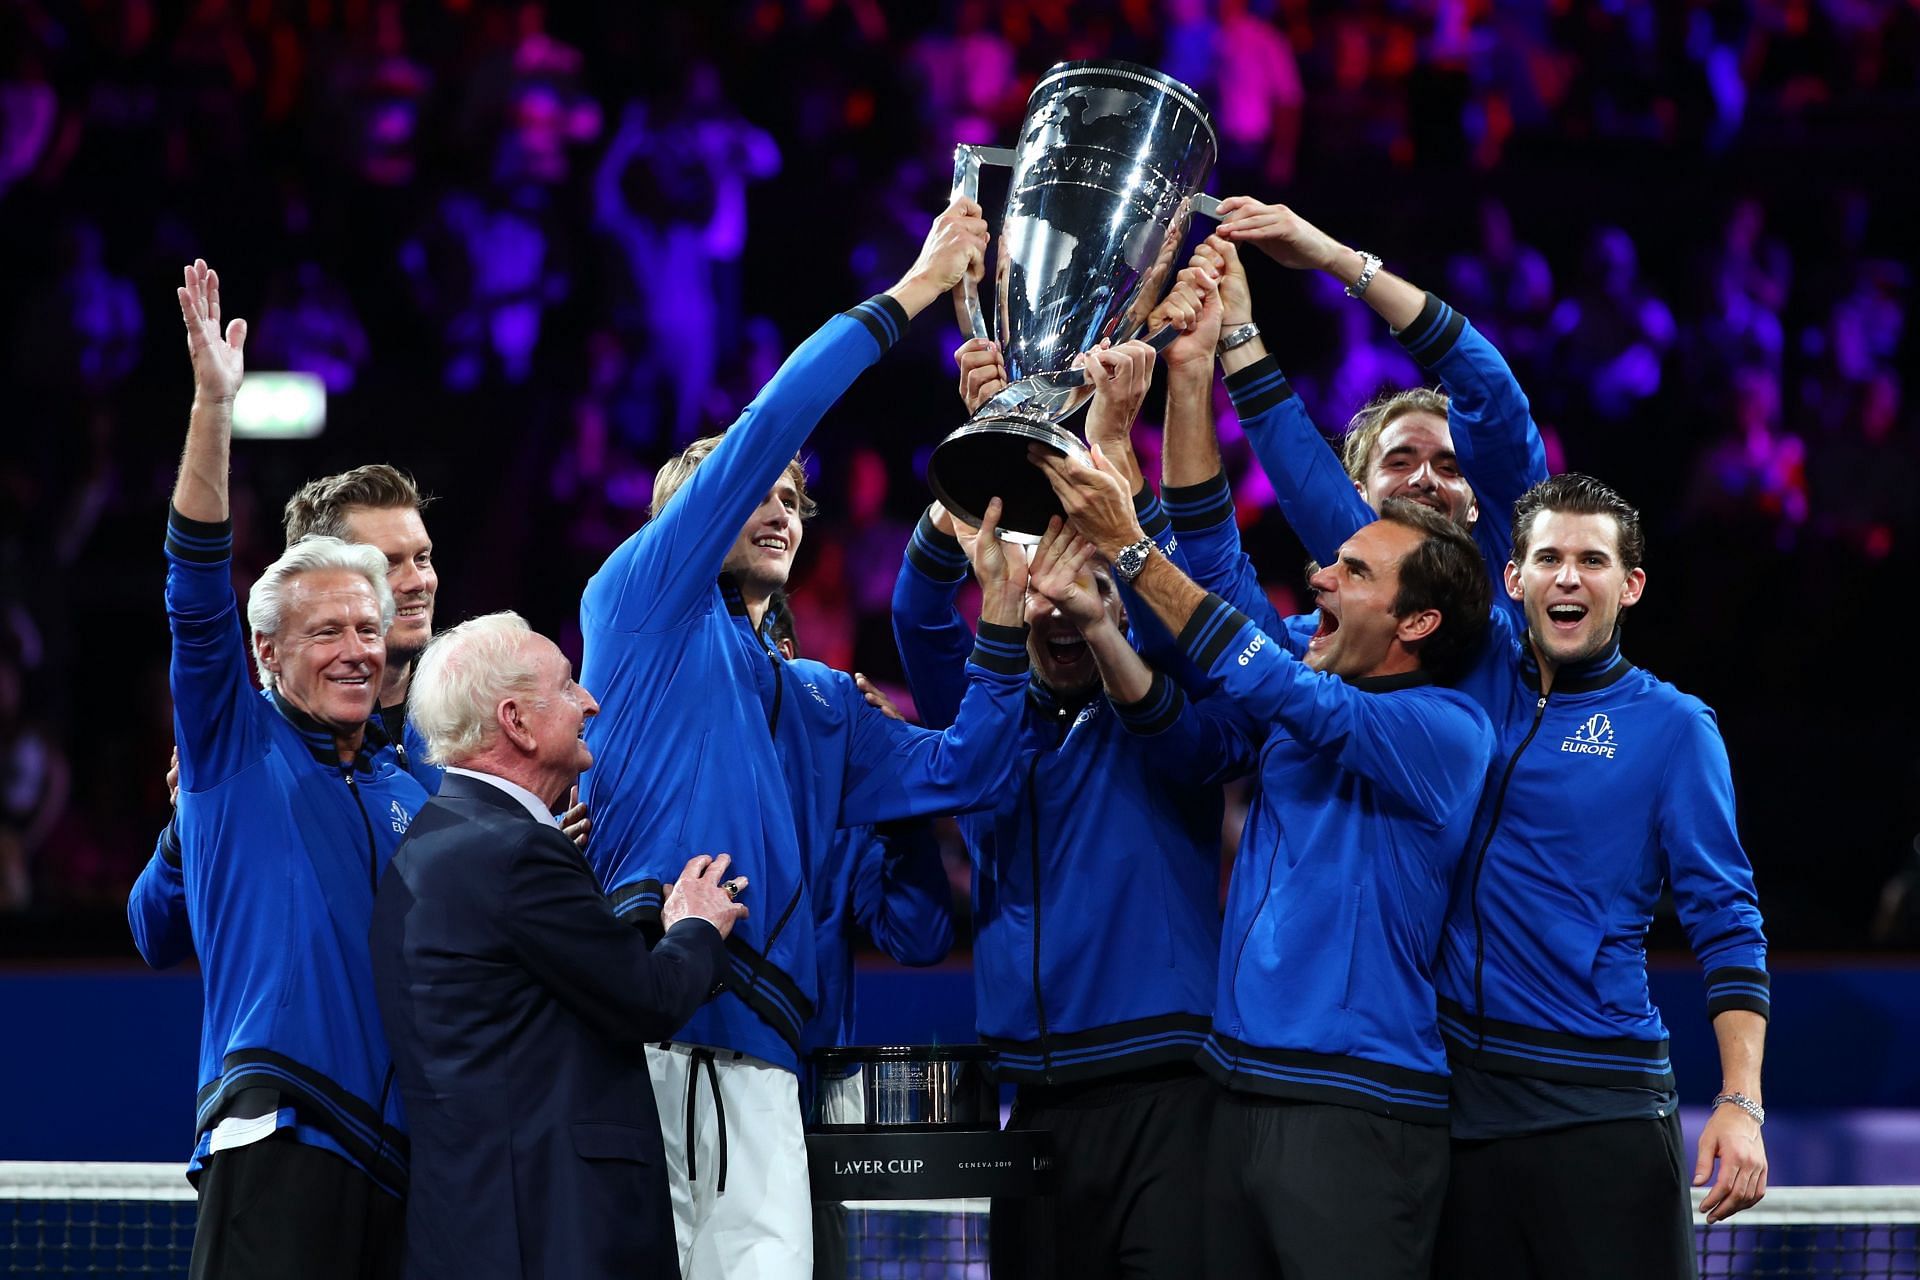 Roger Federer has led Team Europe to victory thrice at the Laver Cup